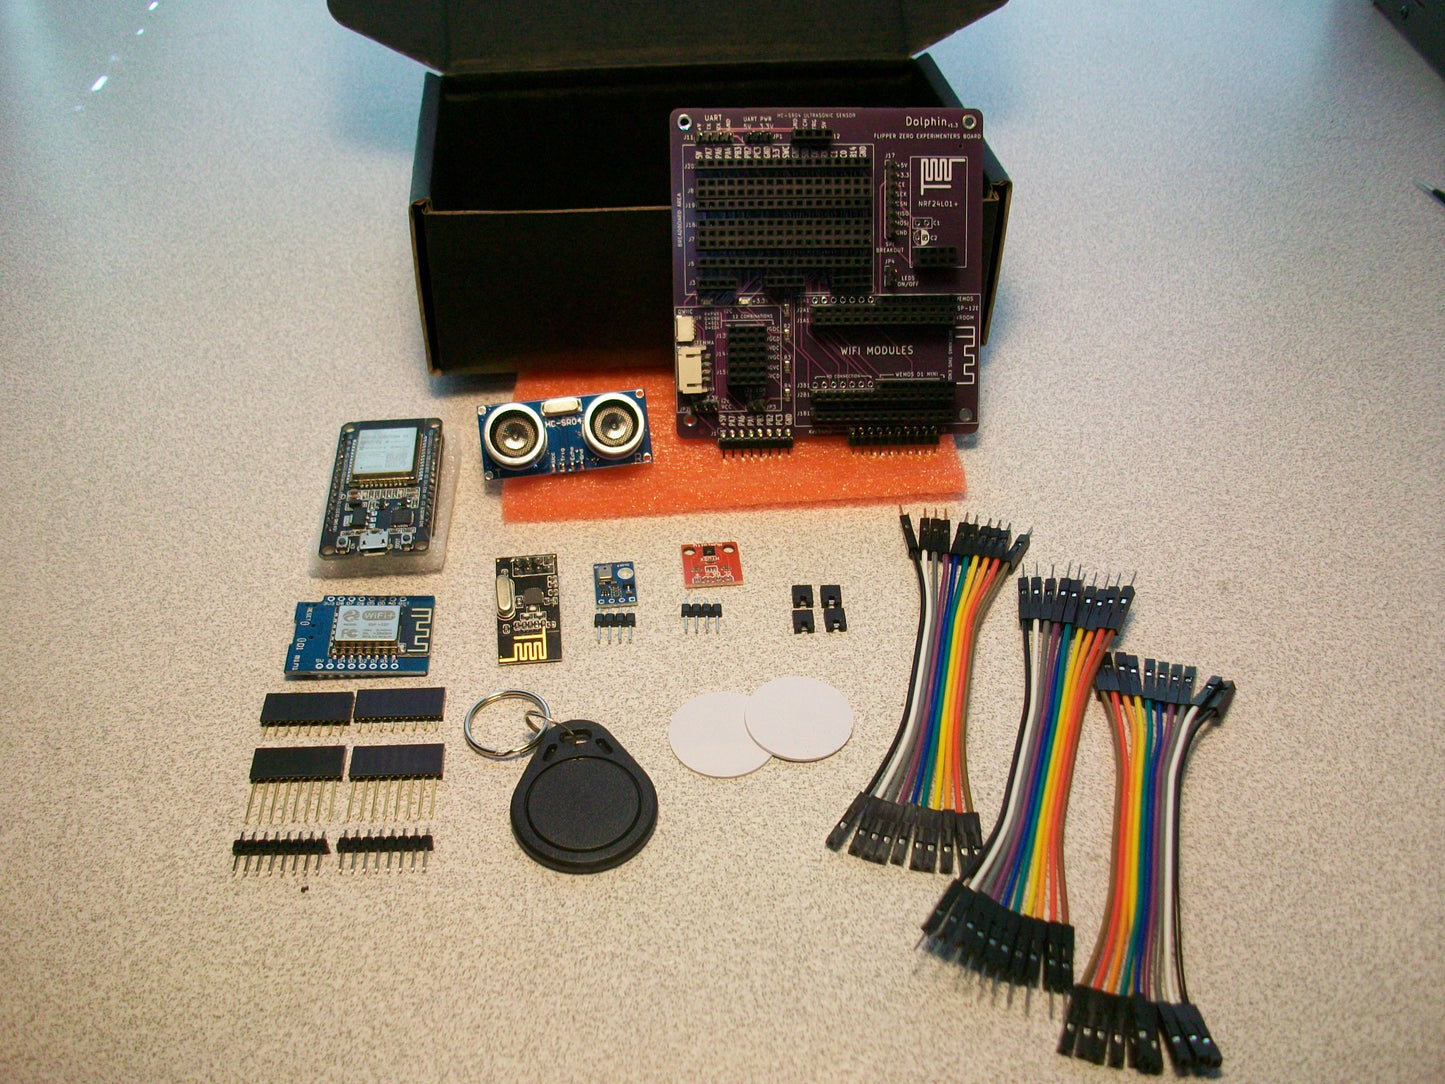 Dolphin experimenters kit for testing and prototyping.  Designed for both advanced and beginners, STEM learning